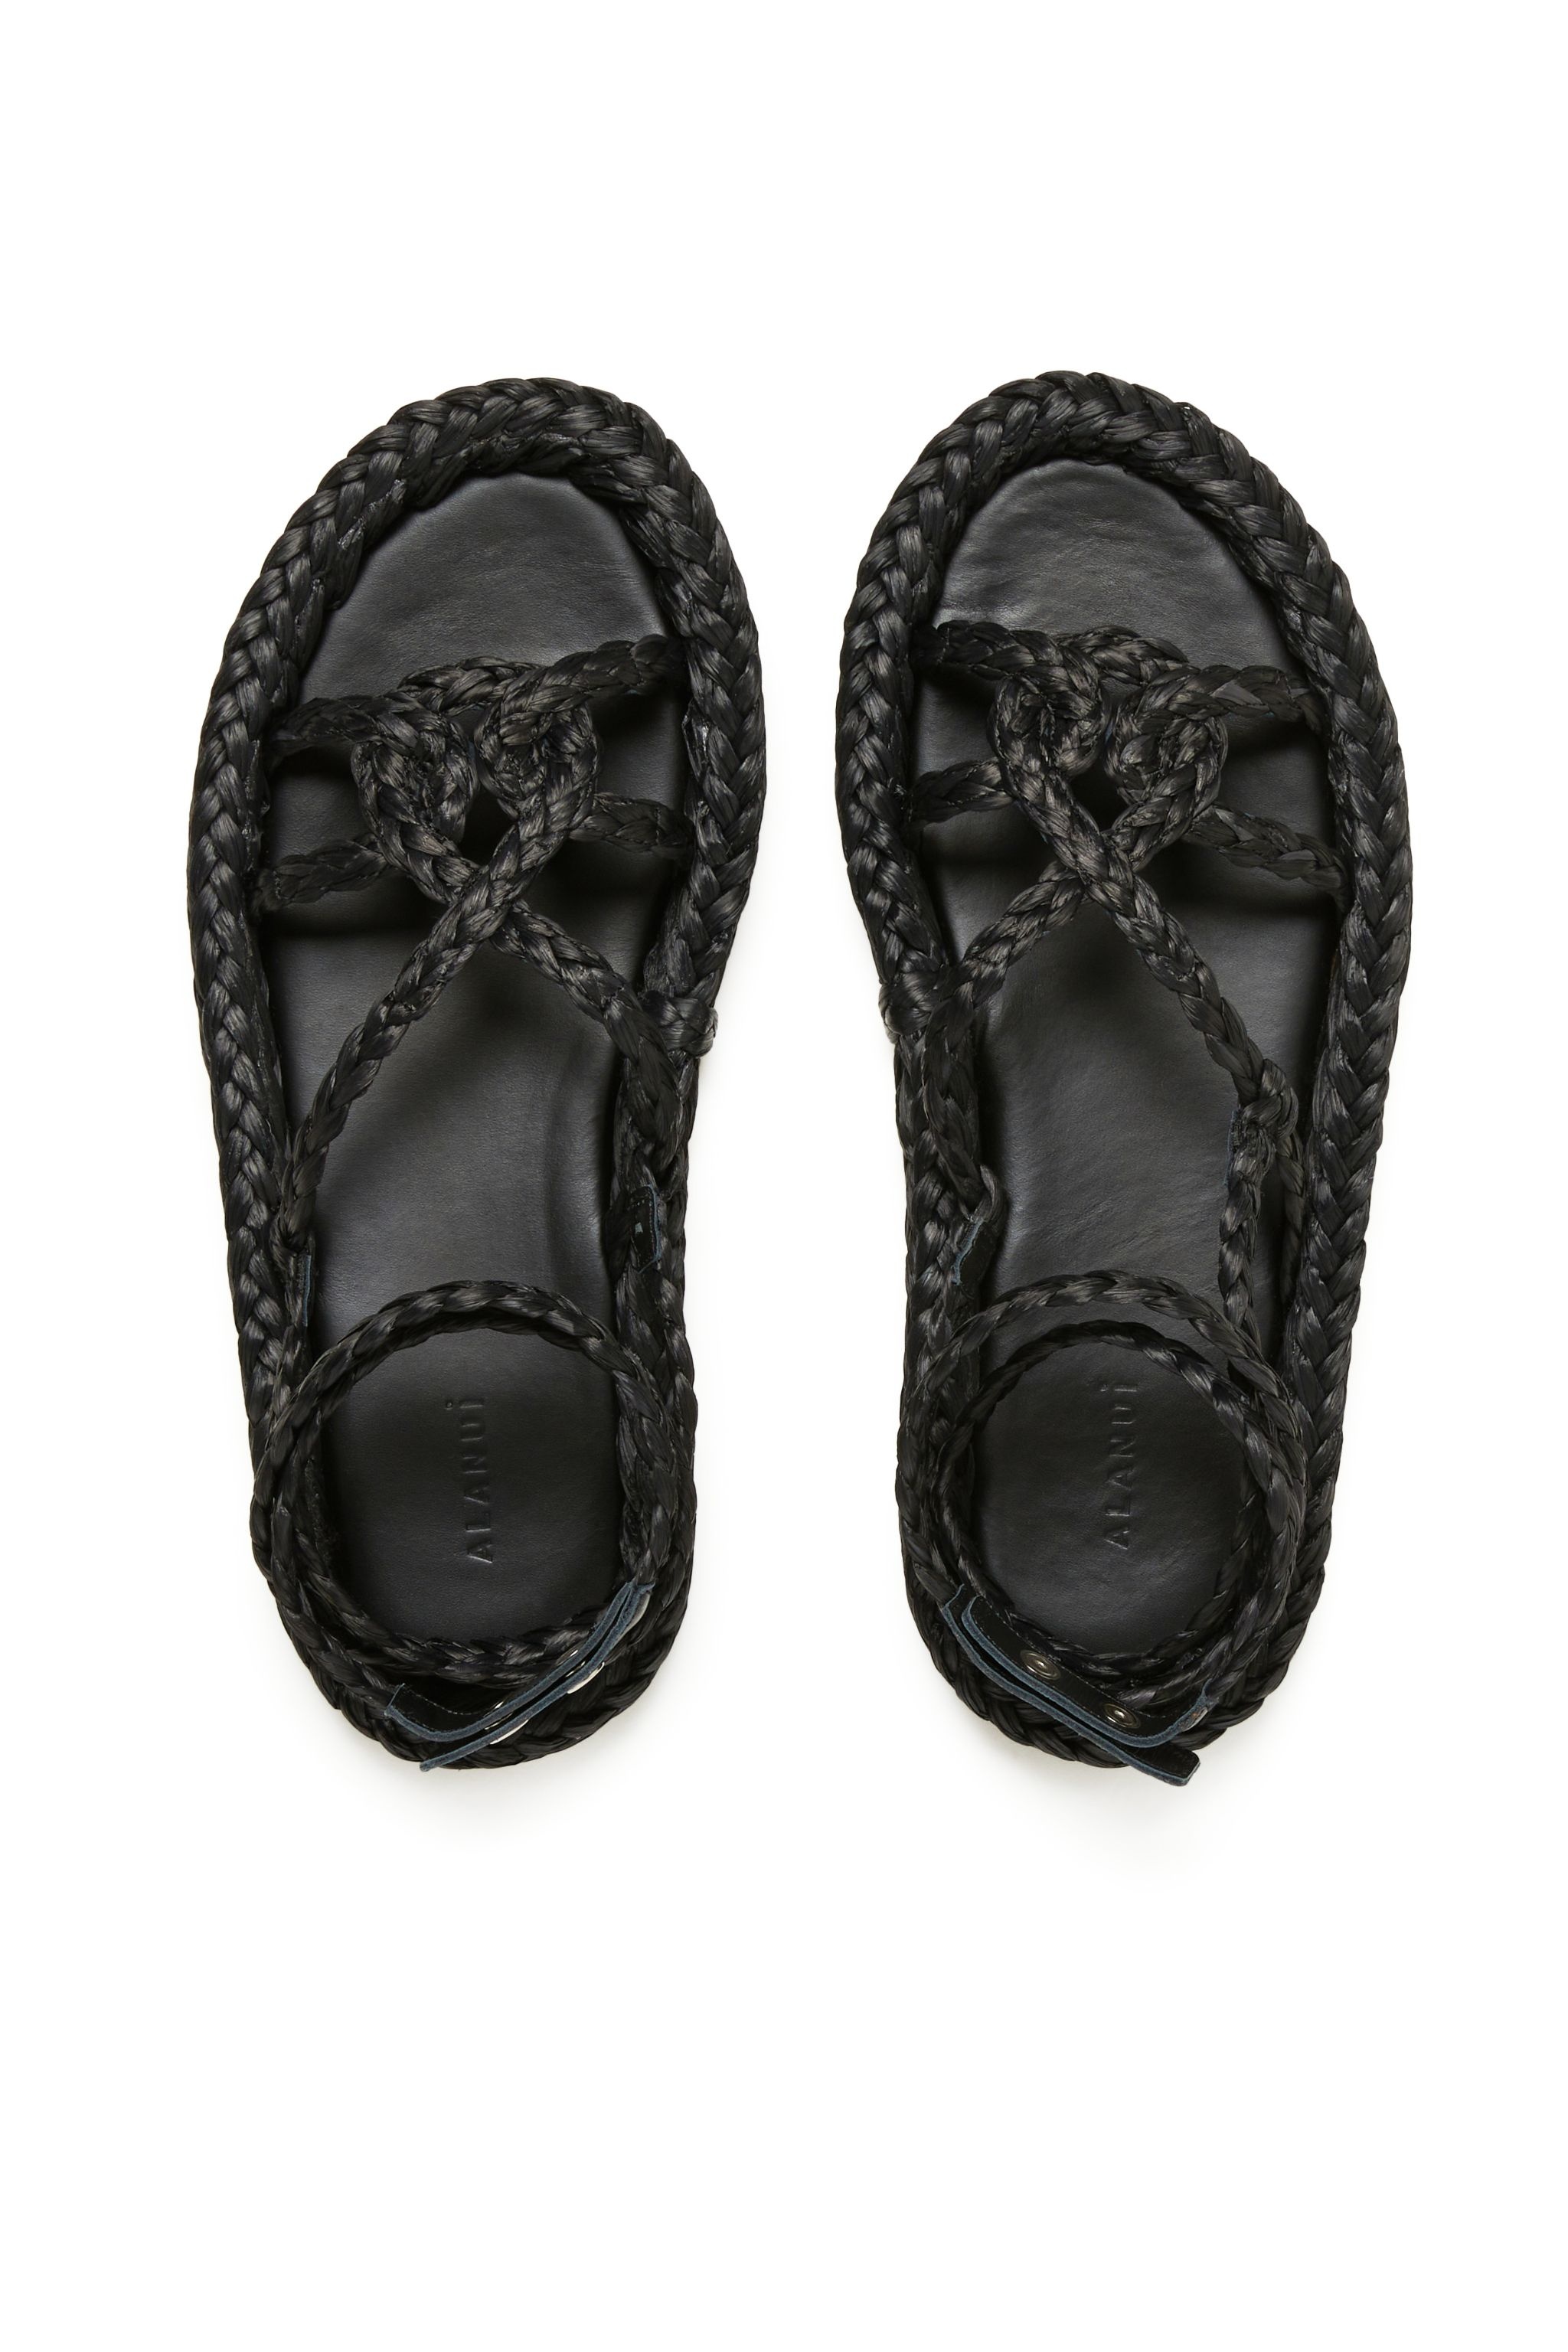 A Love Letter To India Sandals - 6